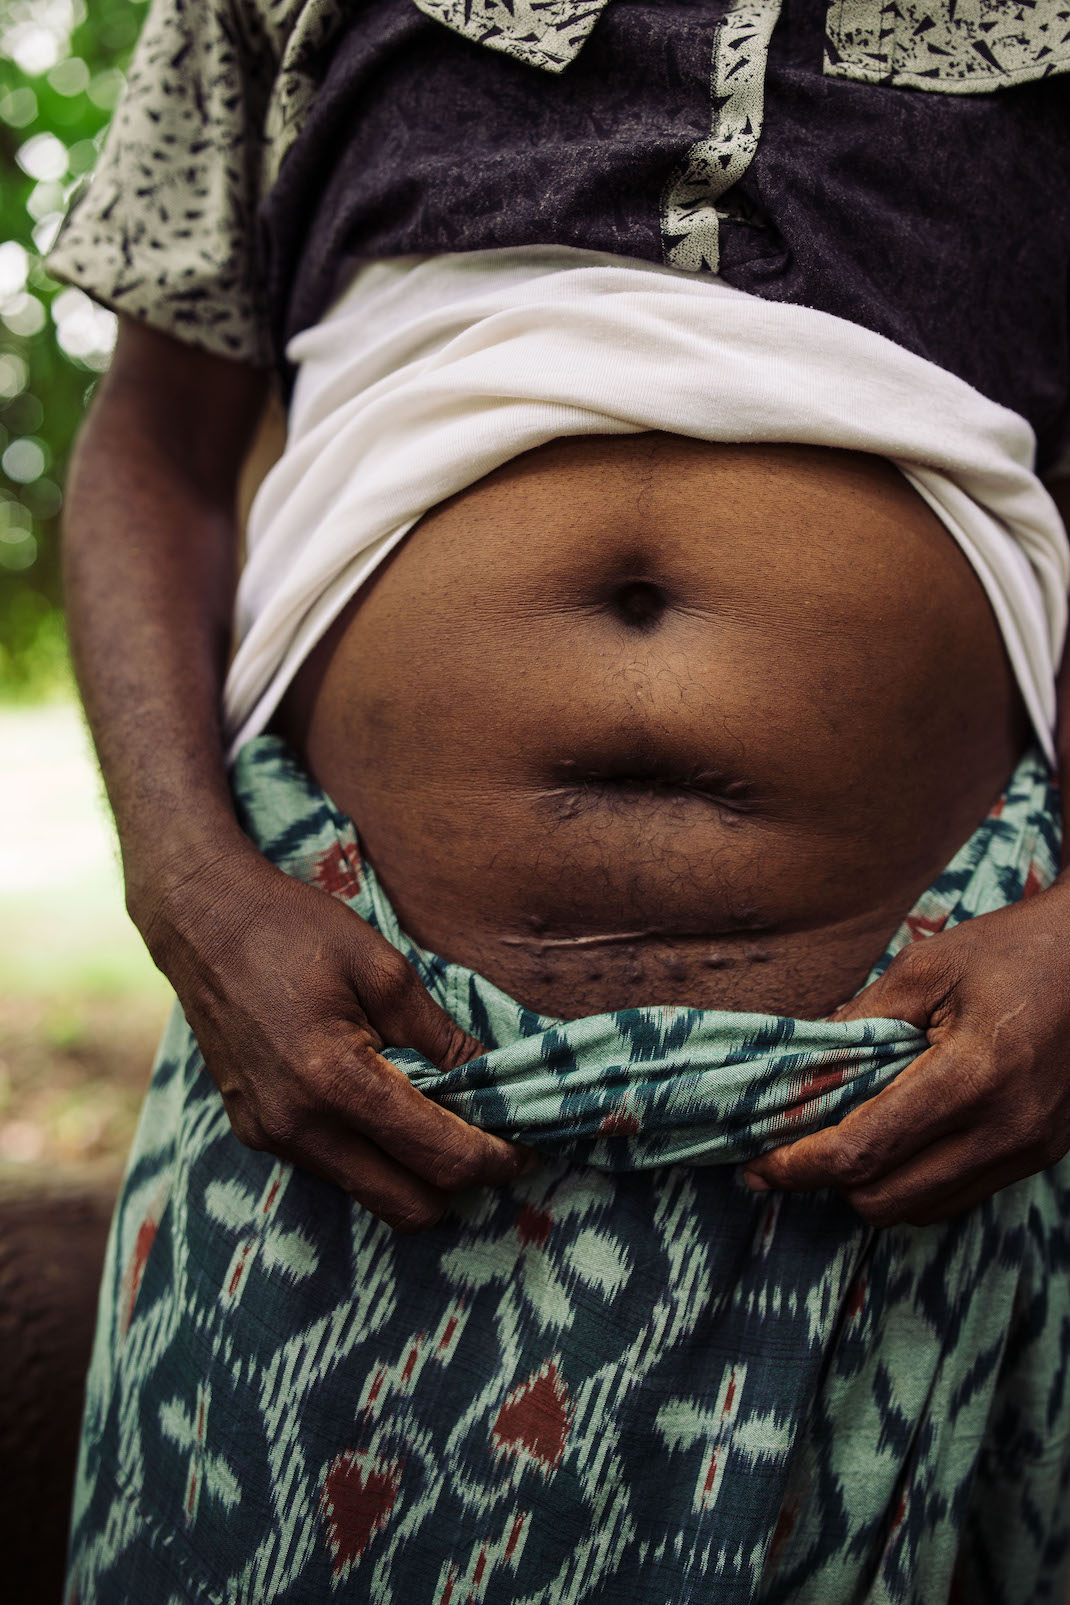 a man shows his stomach which has horizontal healed scars